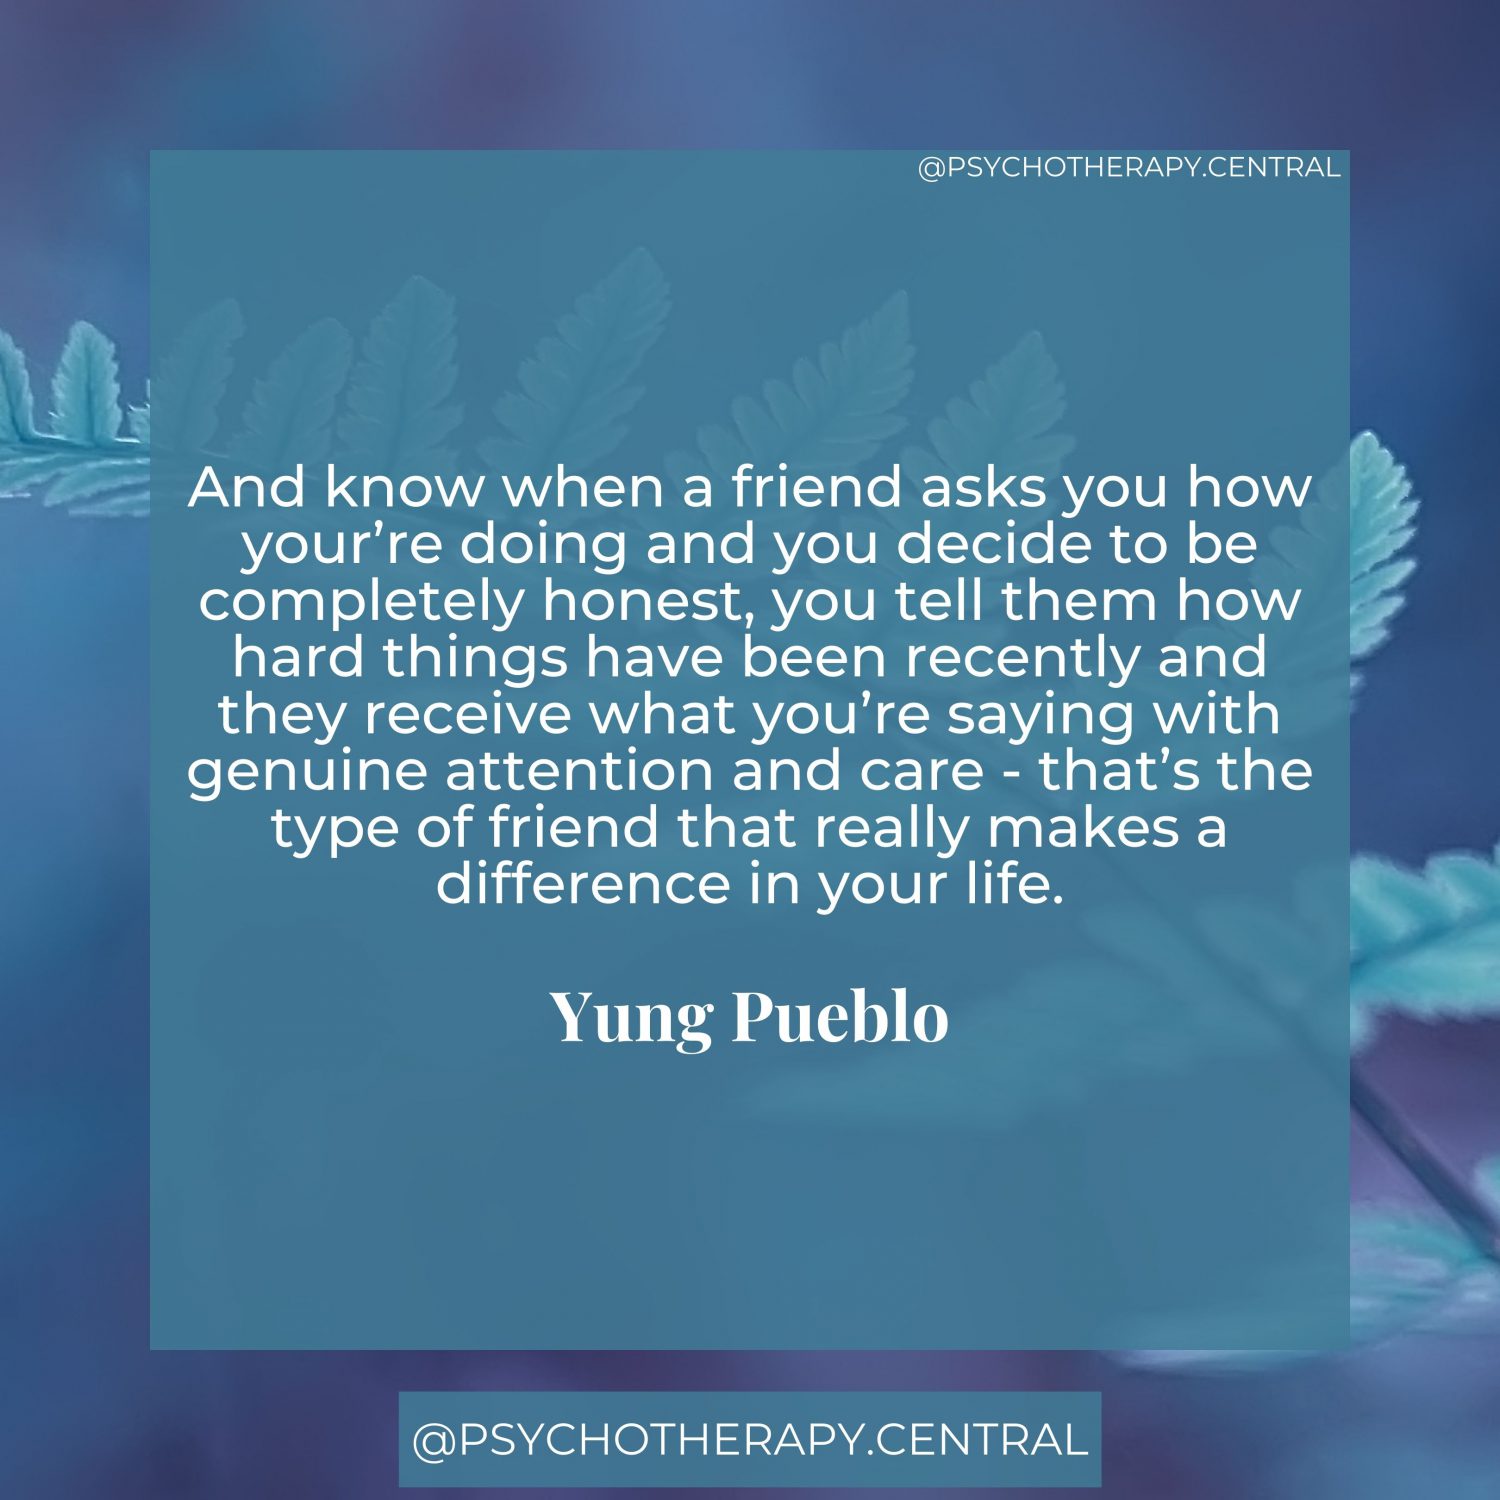 And know when a friend asks you how your’re doing and you decide to be completely honest, you tell them how hard things have been recently and they receive what you’re saying with genuine attention and care - that’s the type of friend that really makes a difference in your life. Yung Pueblo